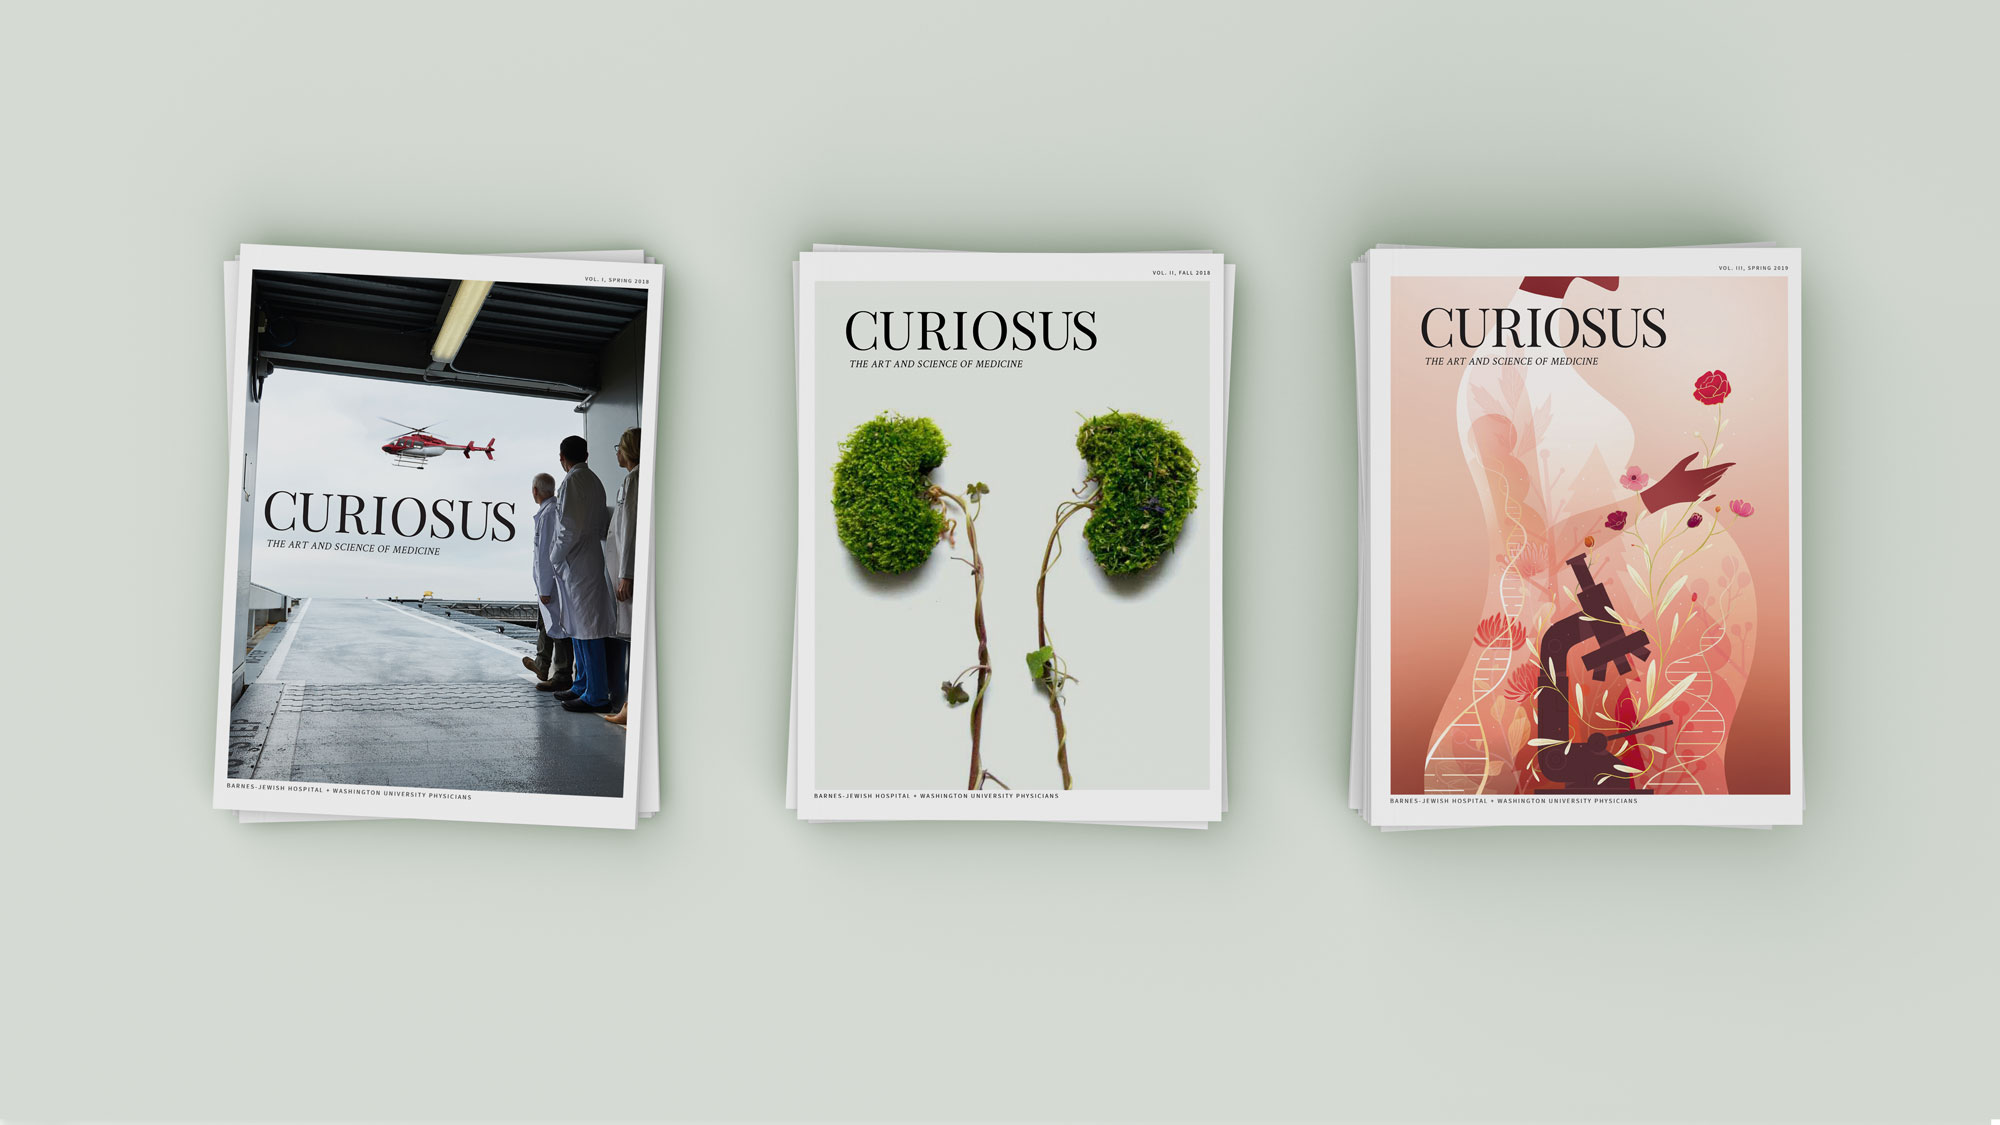 image of 3 covers of the medical publication "Curiosus".